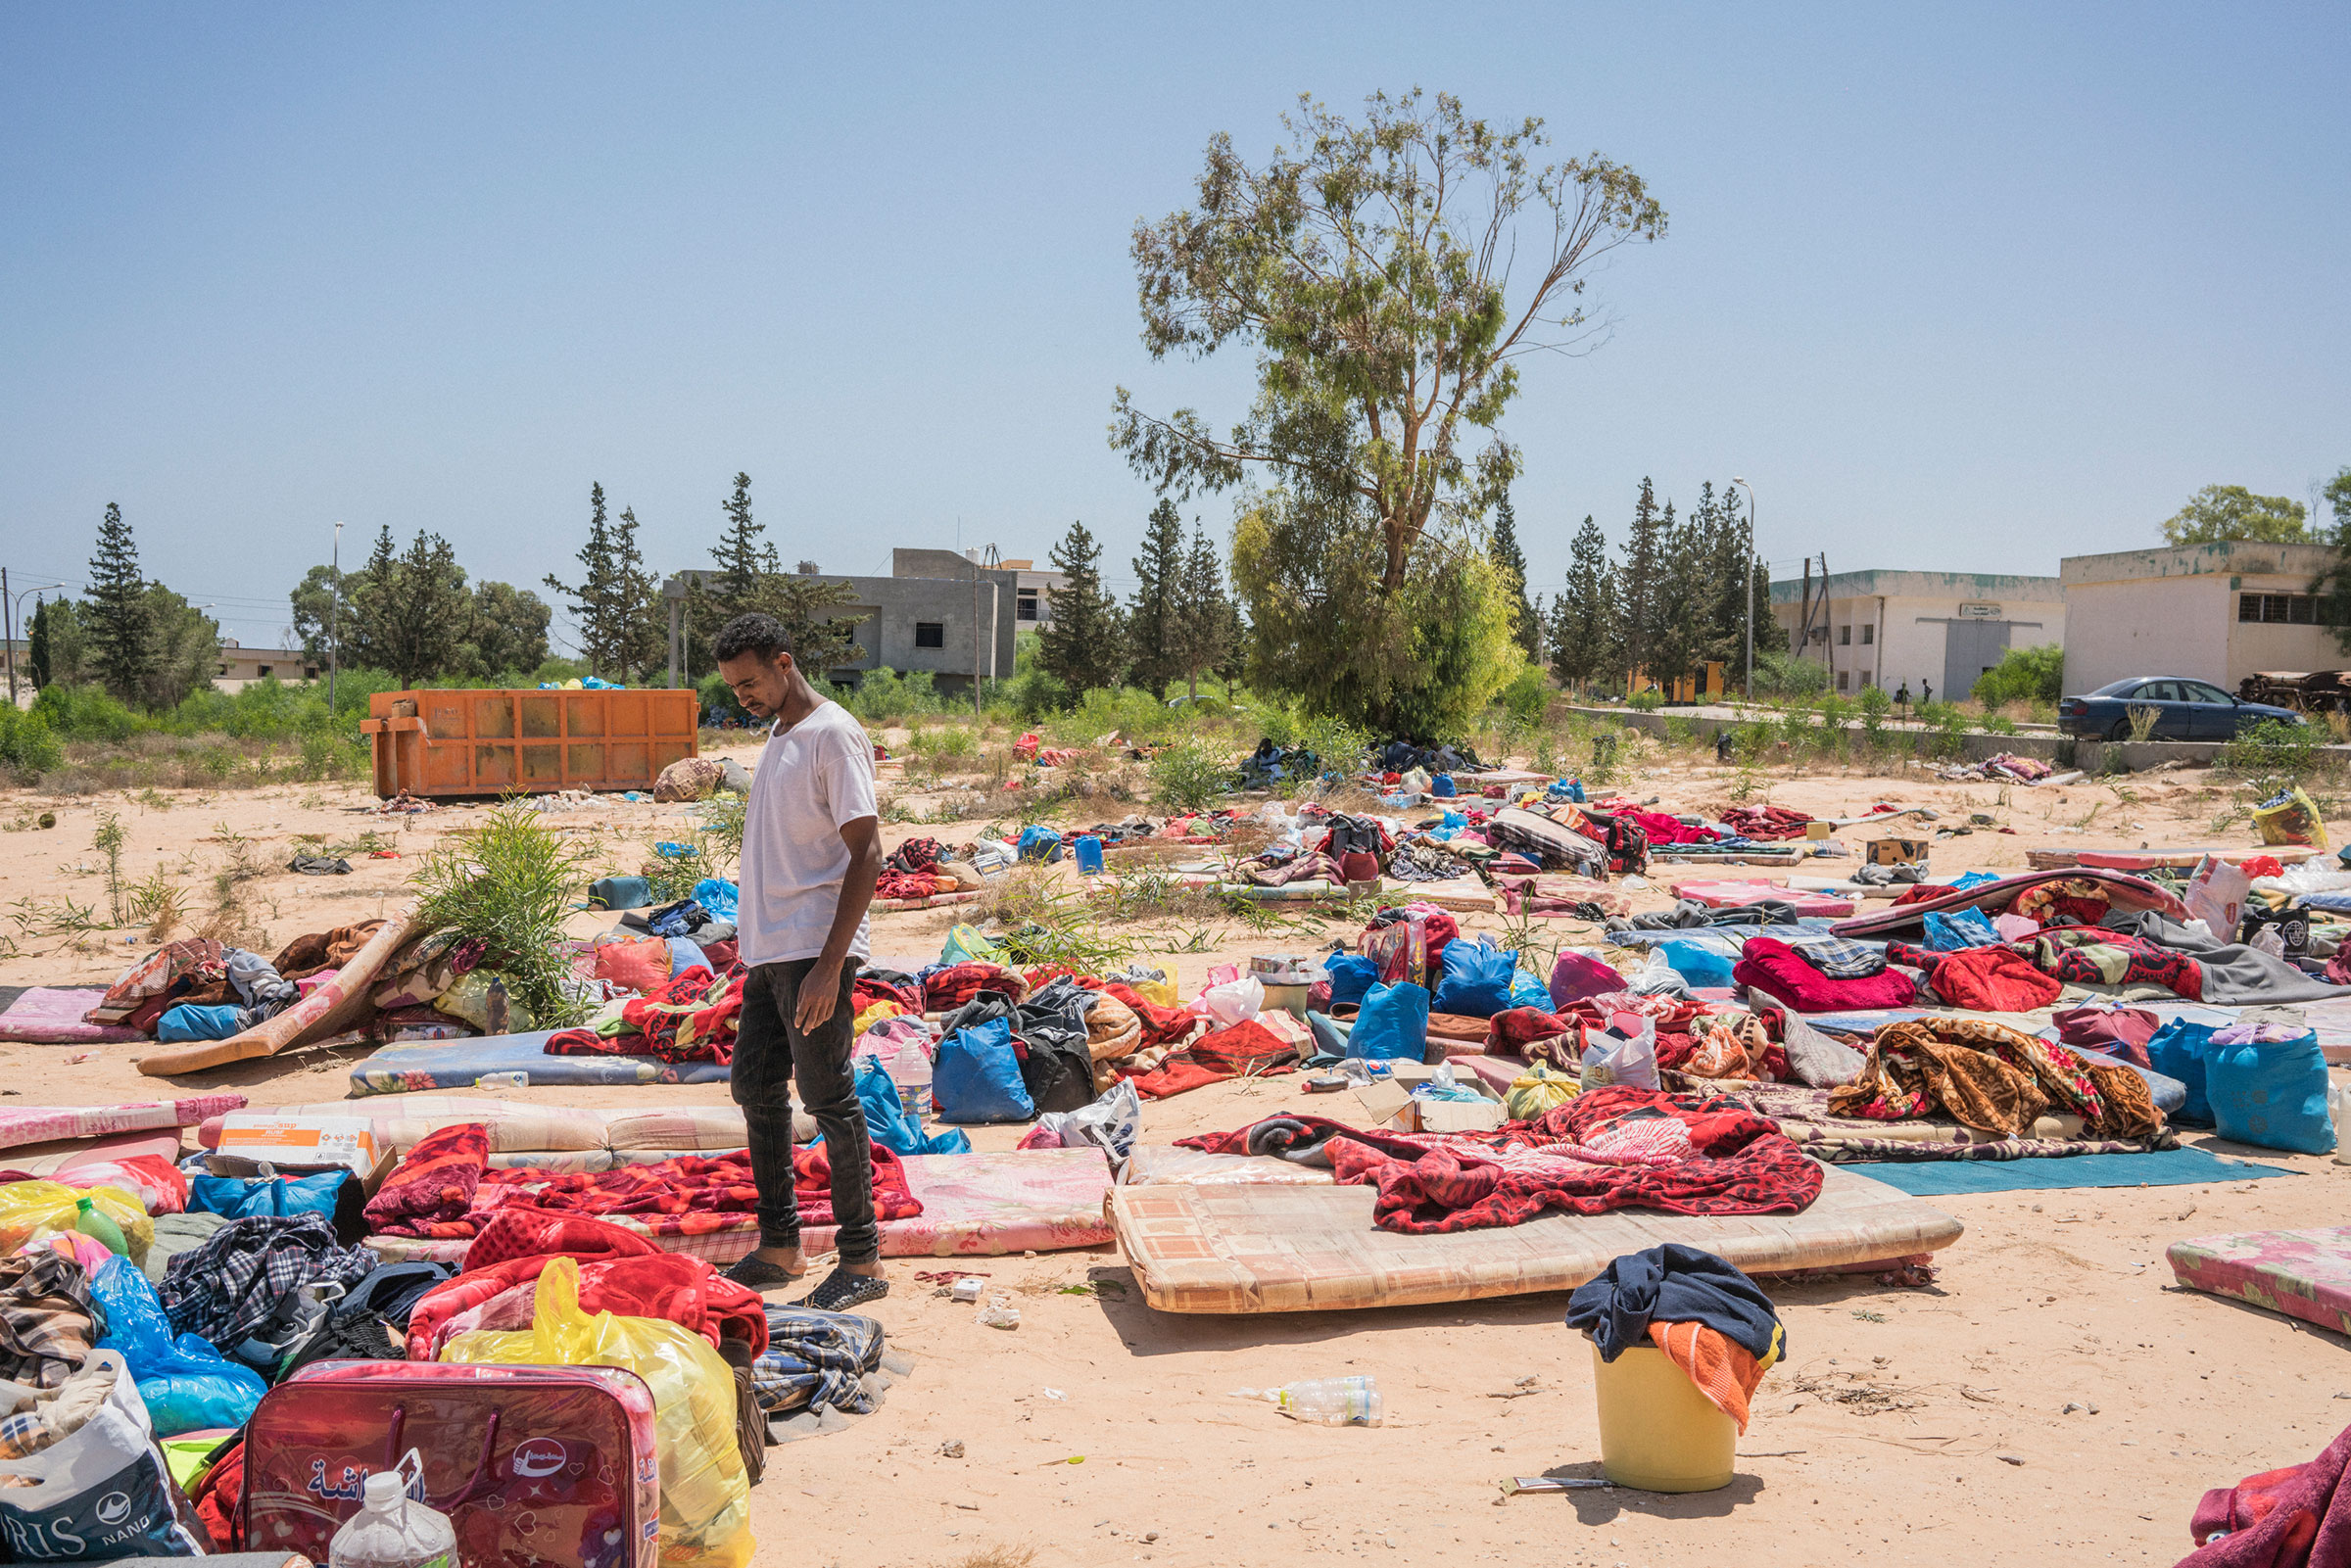 A man stands near damaged belongings after an airstrike hit a detention center, killing 53 people and injuring about 130 people, near Tripoli on July 3, 2019. (Emanuele Satolli)